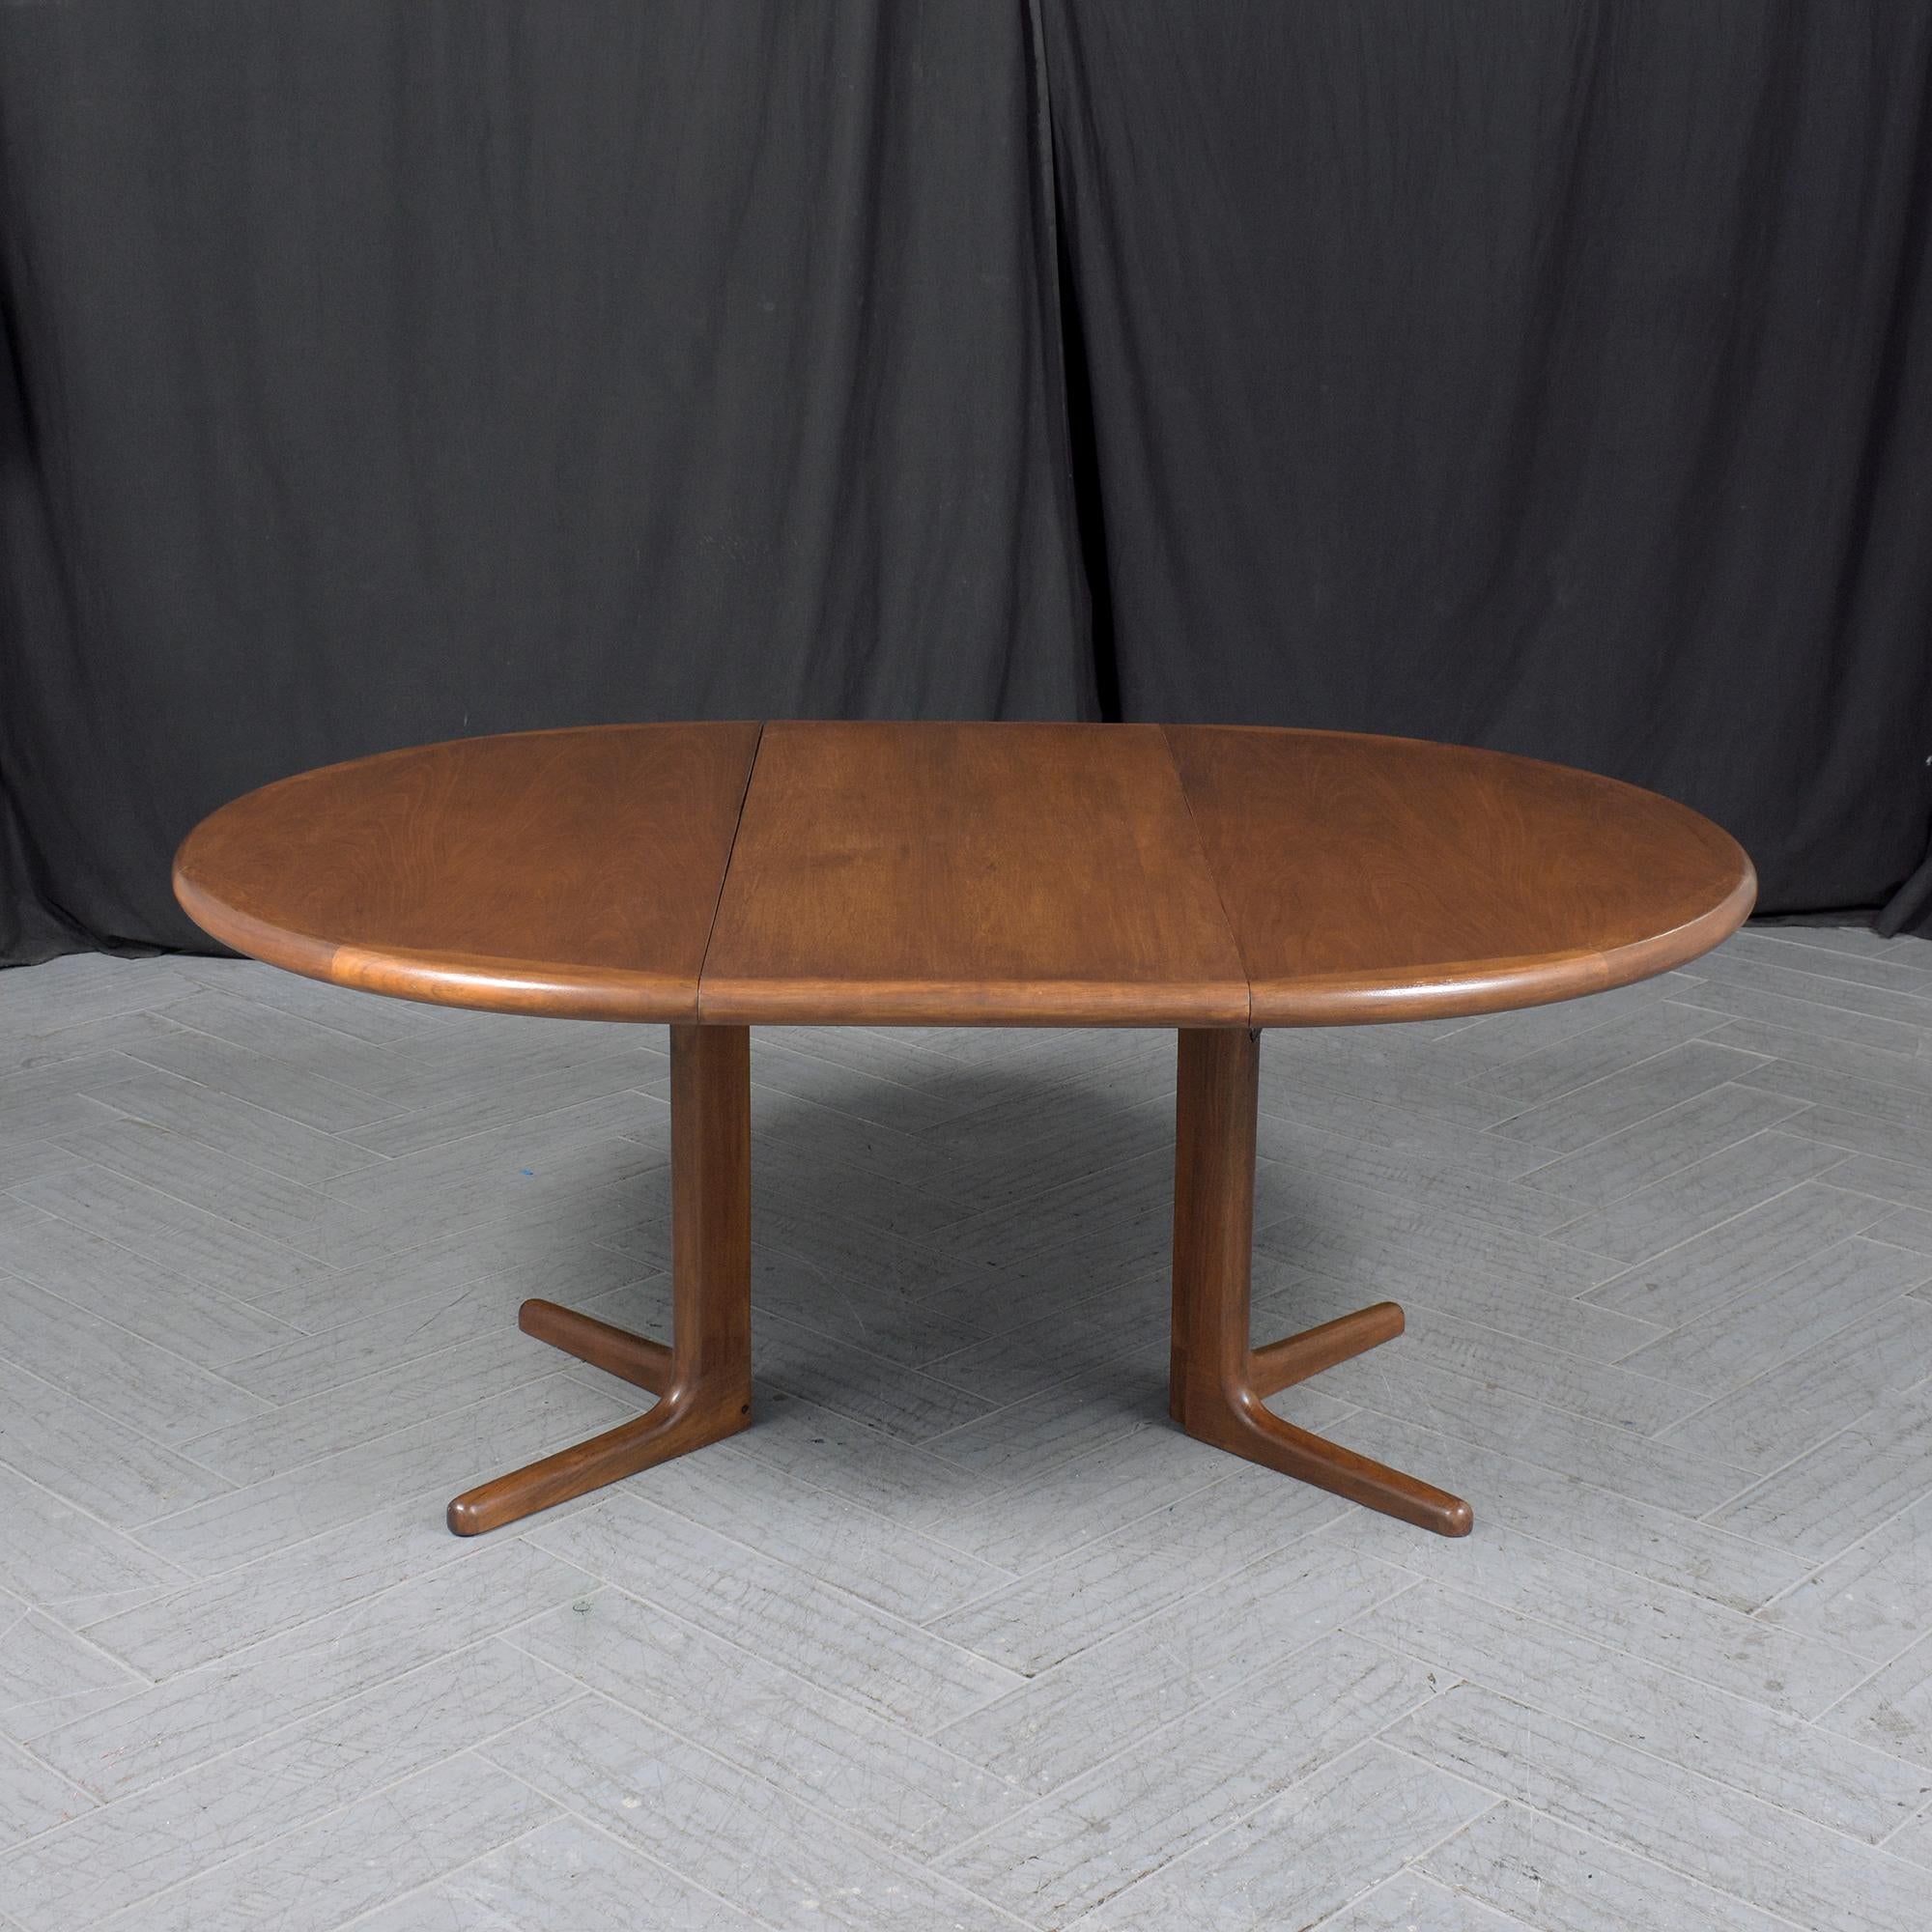 Stained Vintage Danish Extendable Dining Table: Mid-Century Modern Elegance